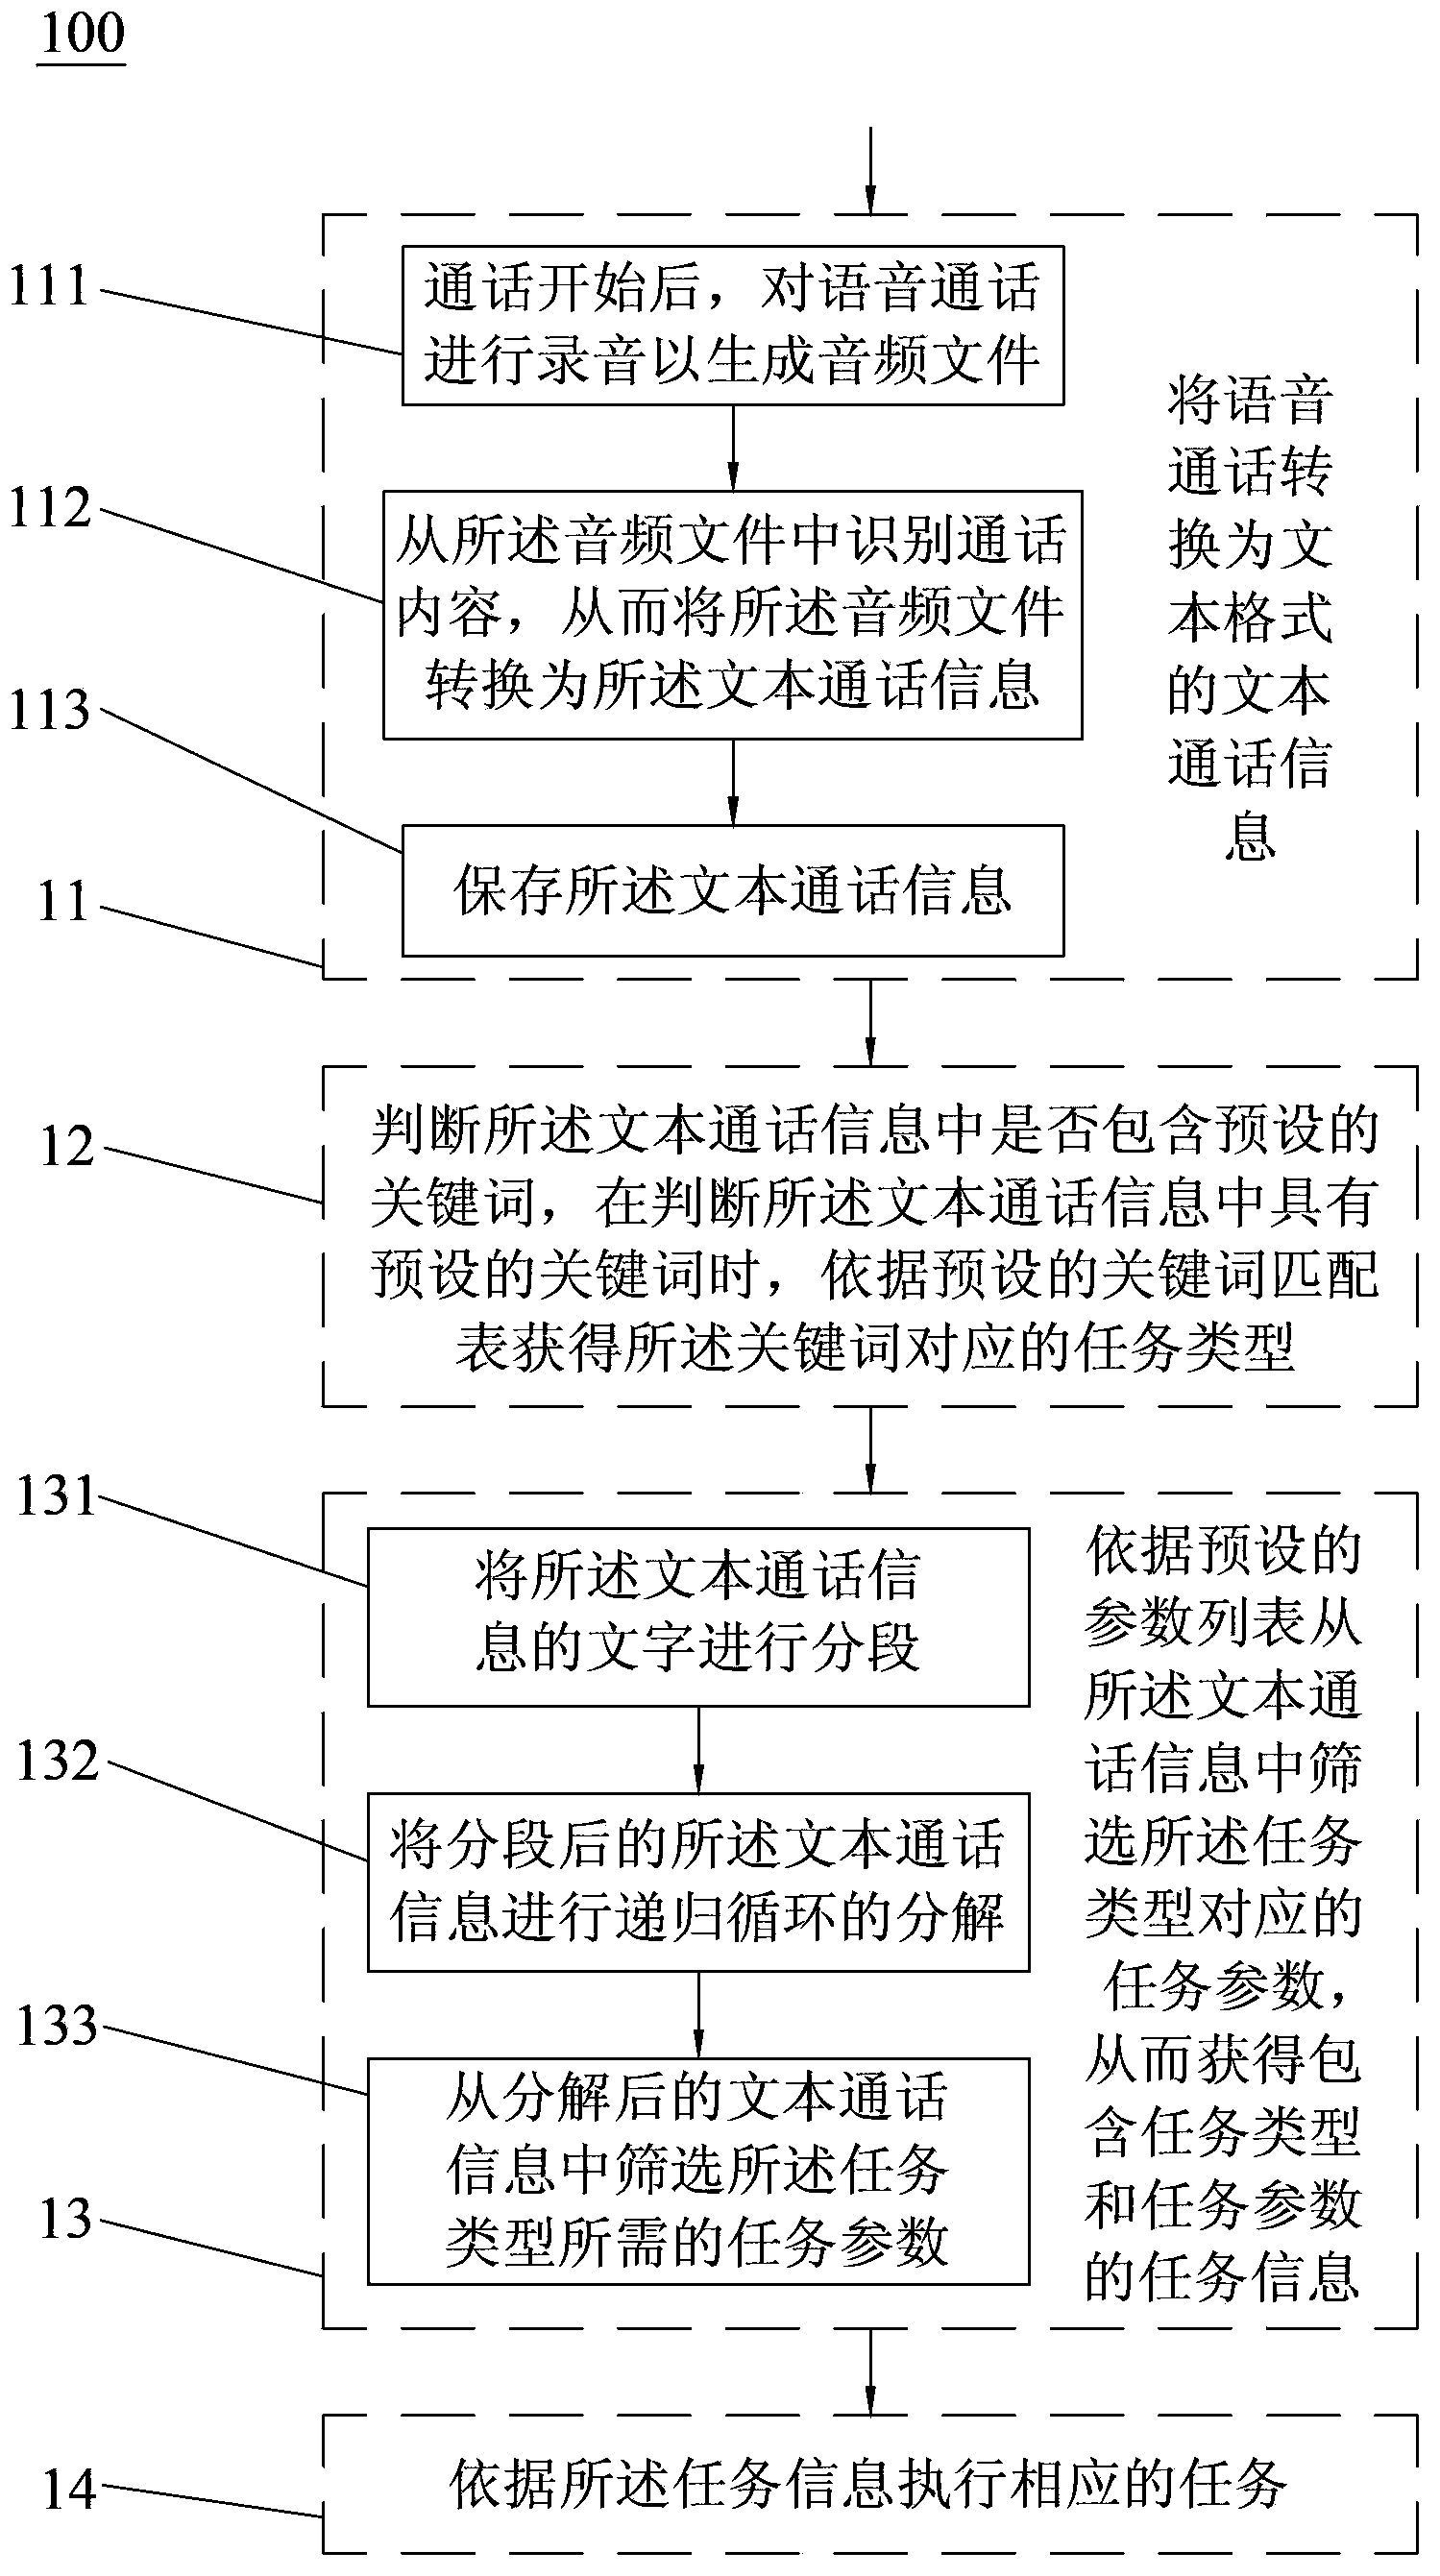 Method and mobile terminal for executing tasks according to communication information